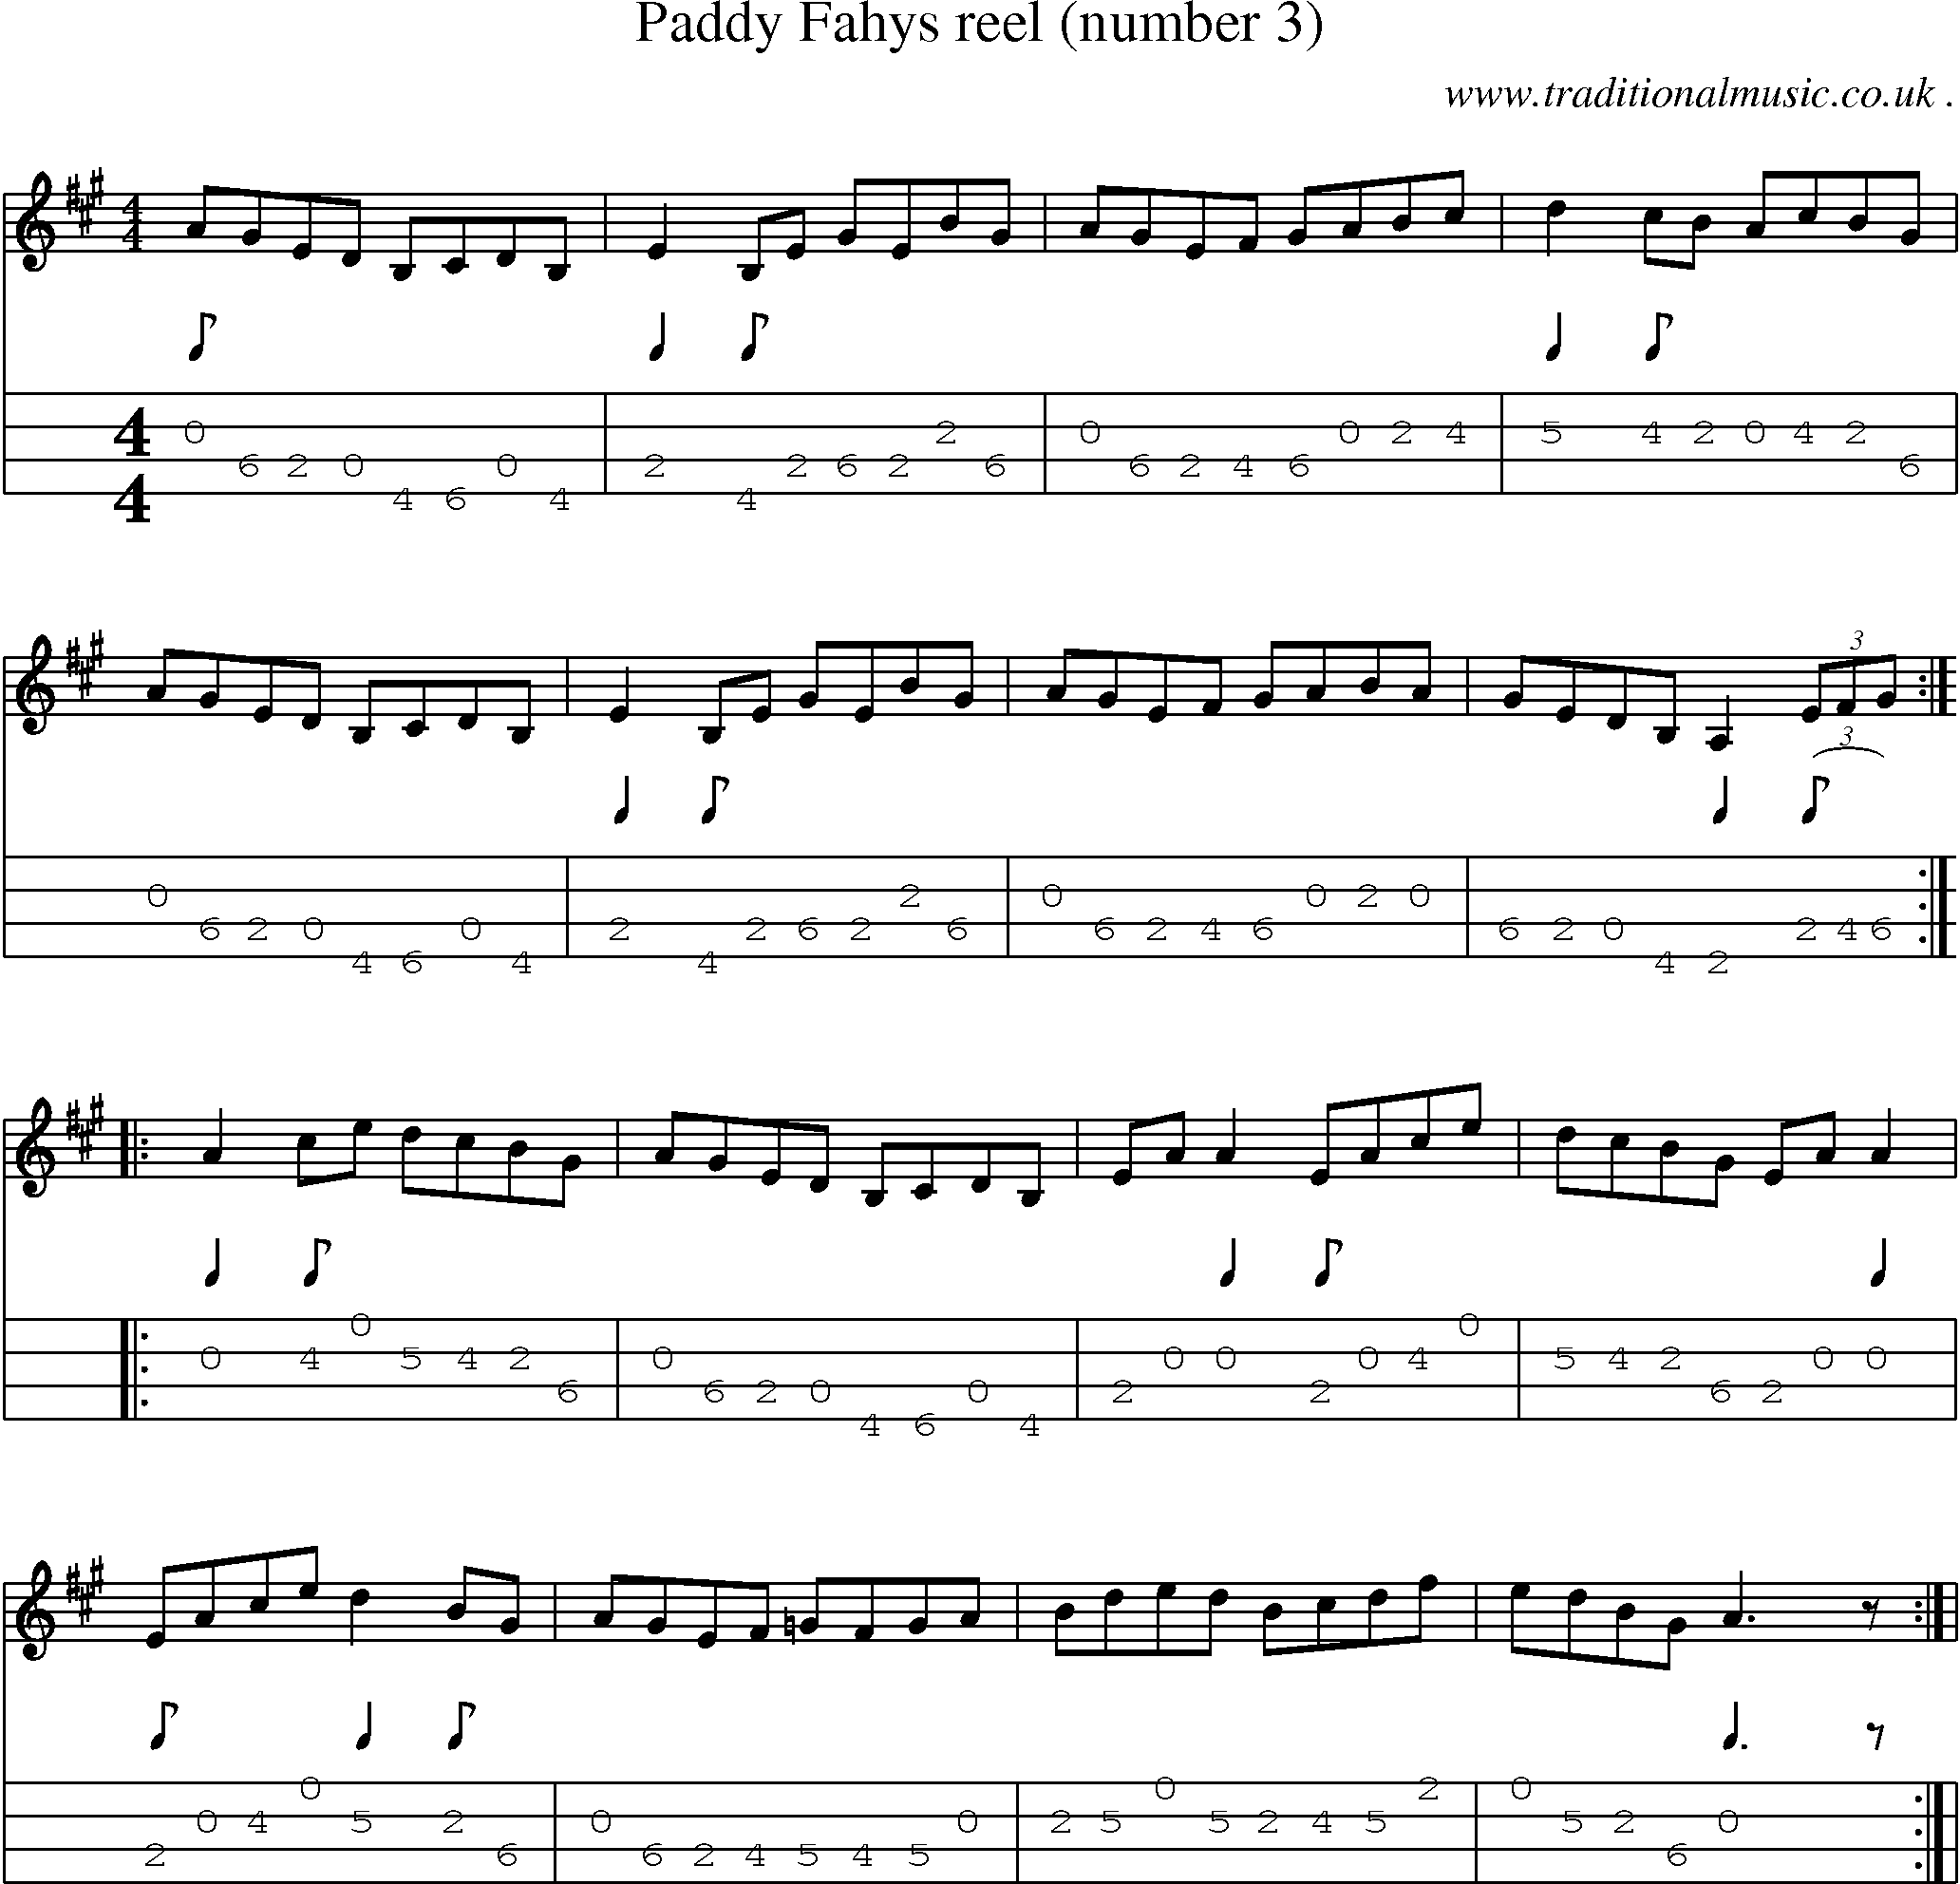 Sheet-Music and Mandolin Tabs for Paddy Fahys Reel (number 3)